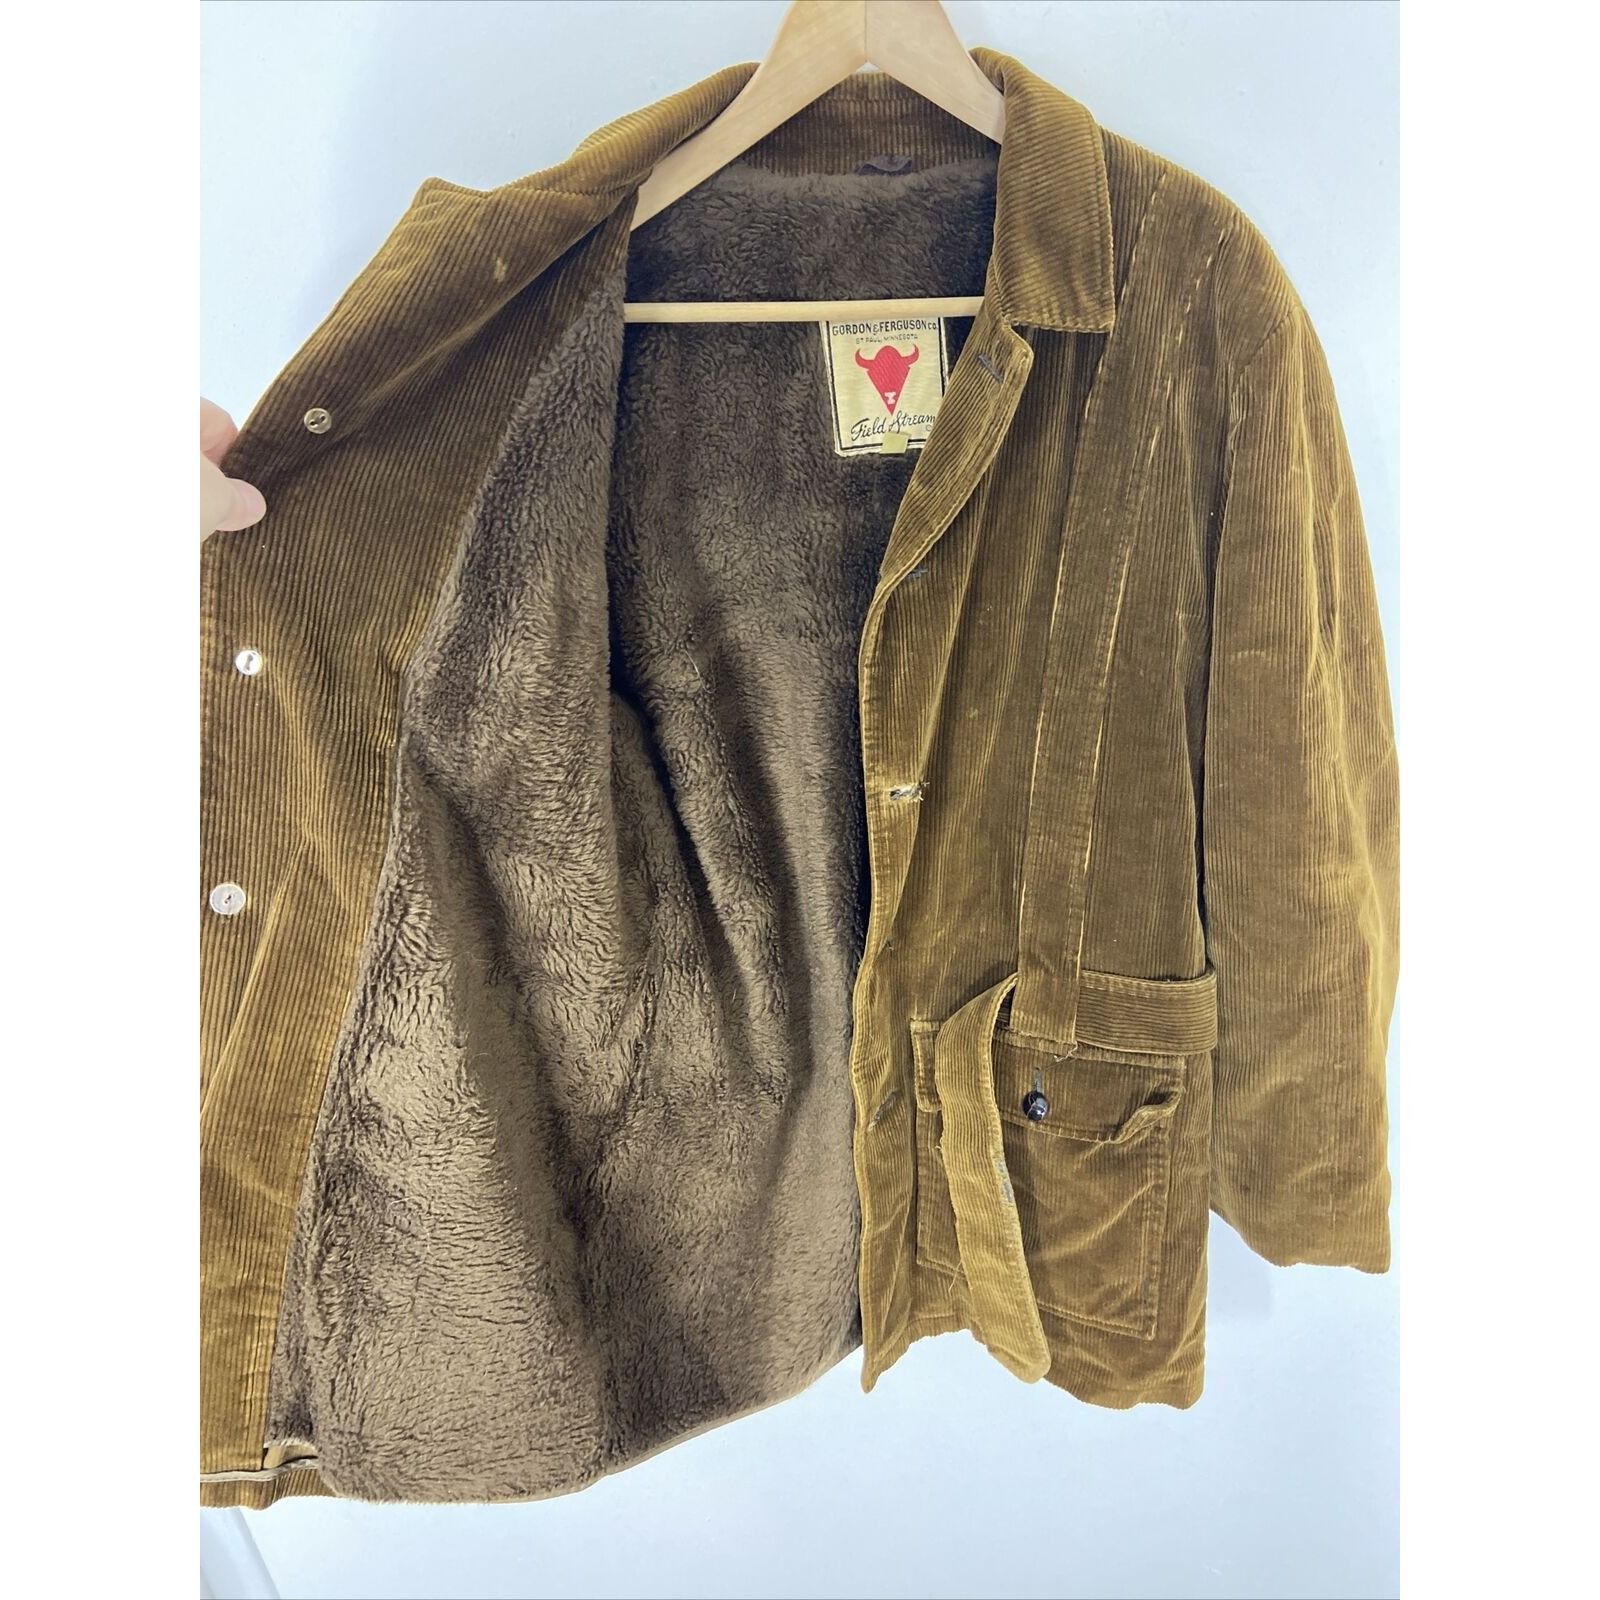 Field And Stream Vintage Field and Stream Men 40 S/M Corduroy Hunting Coat Size US M / EU 48-50 / 2 - 9 Thumbnail